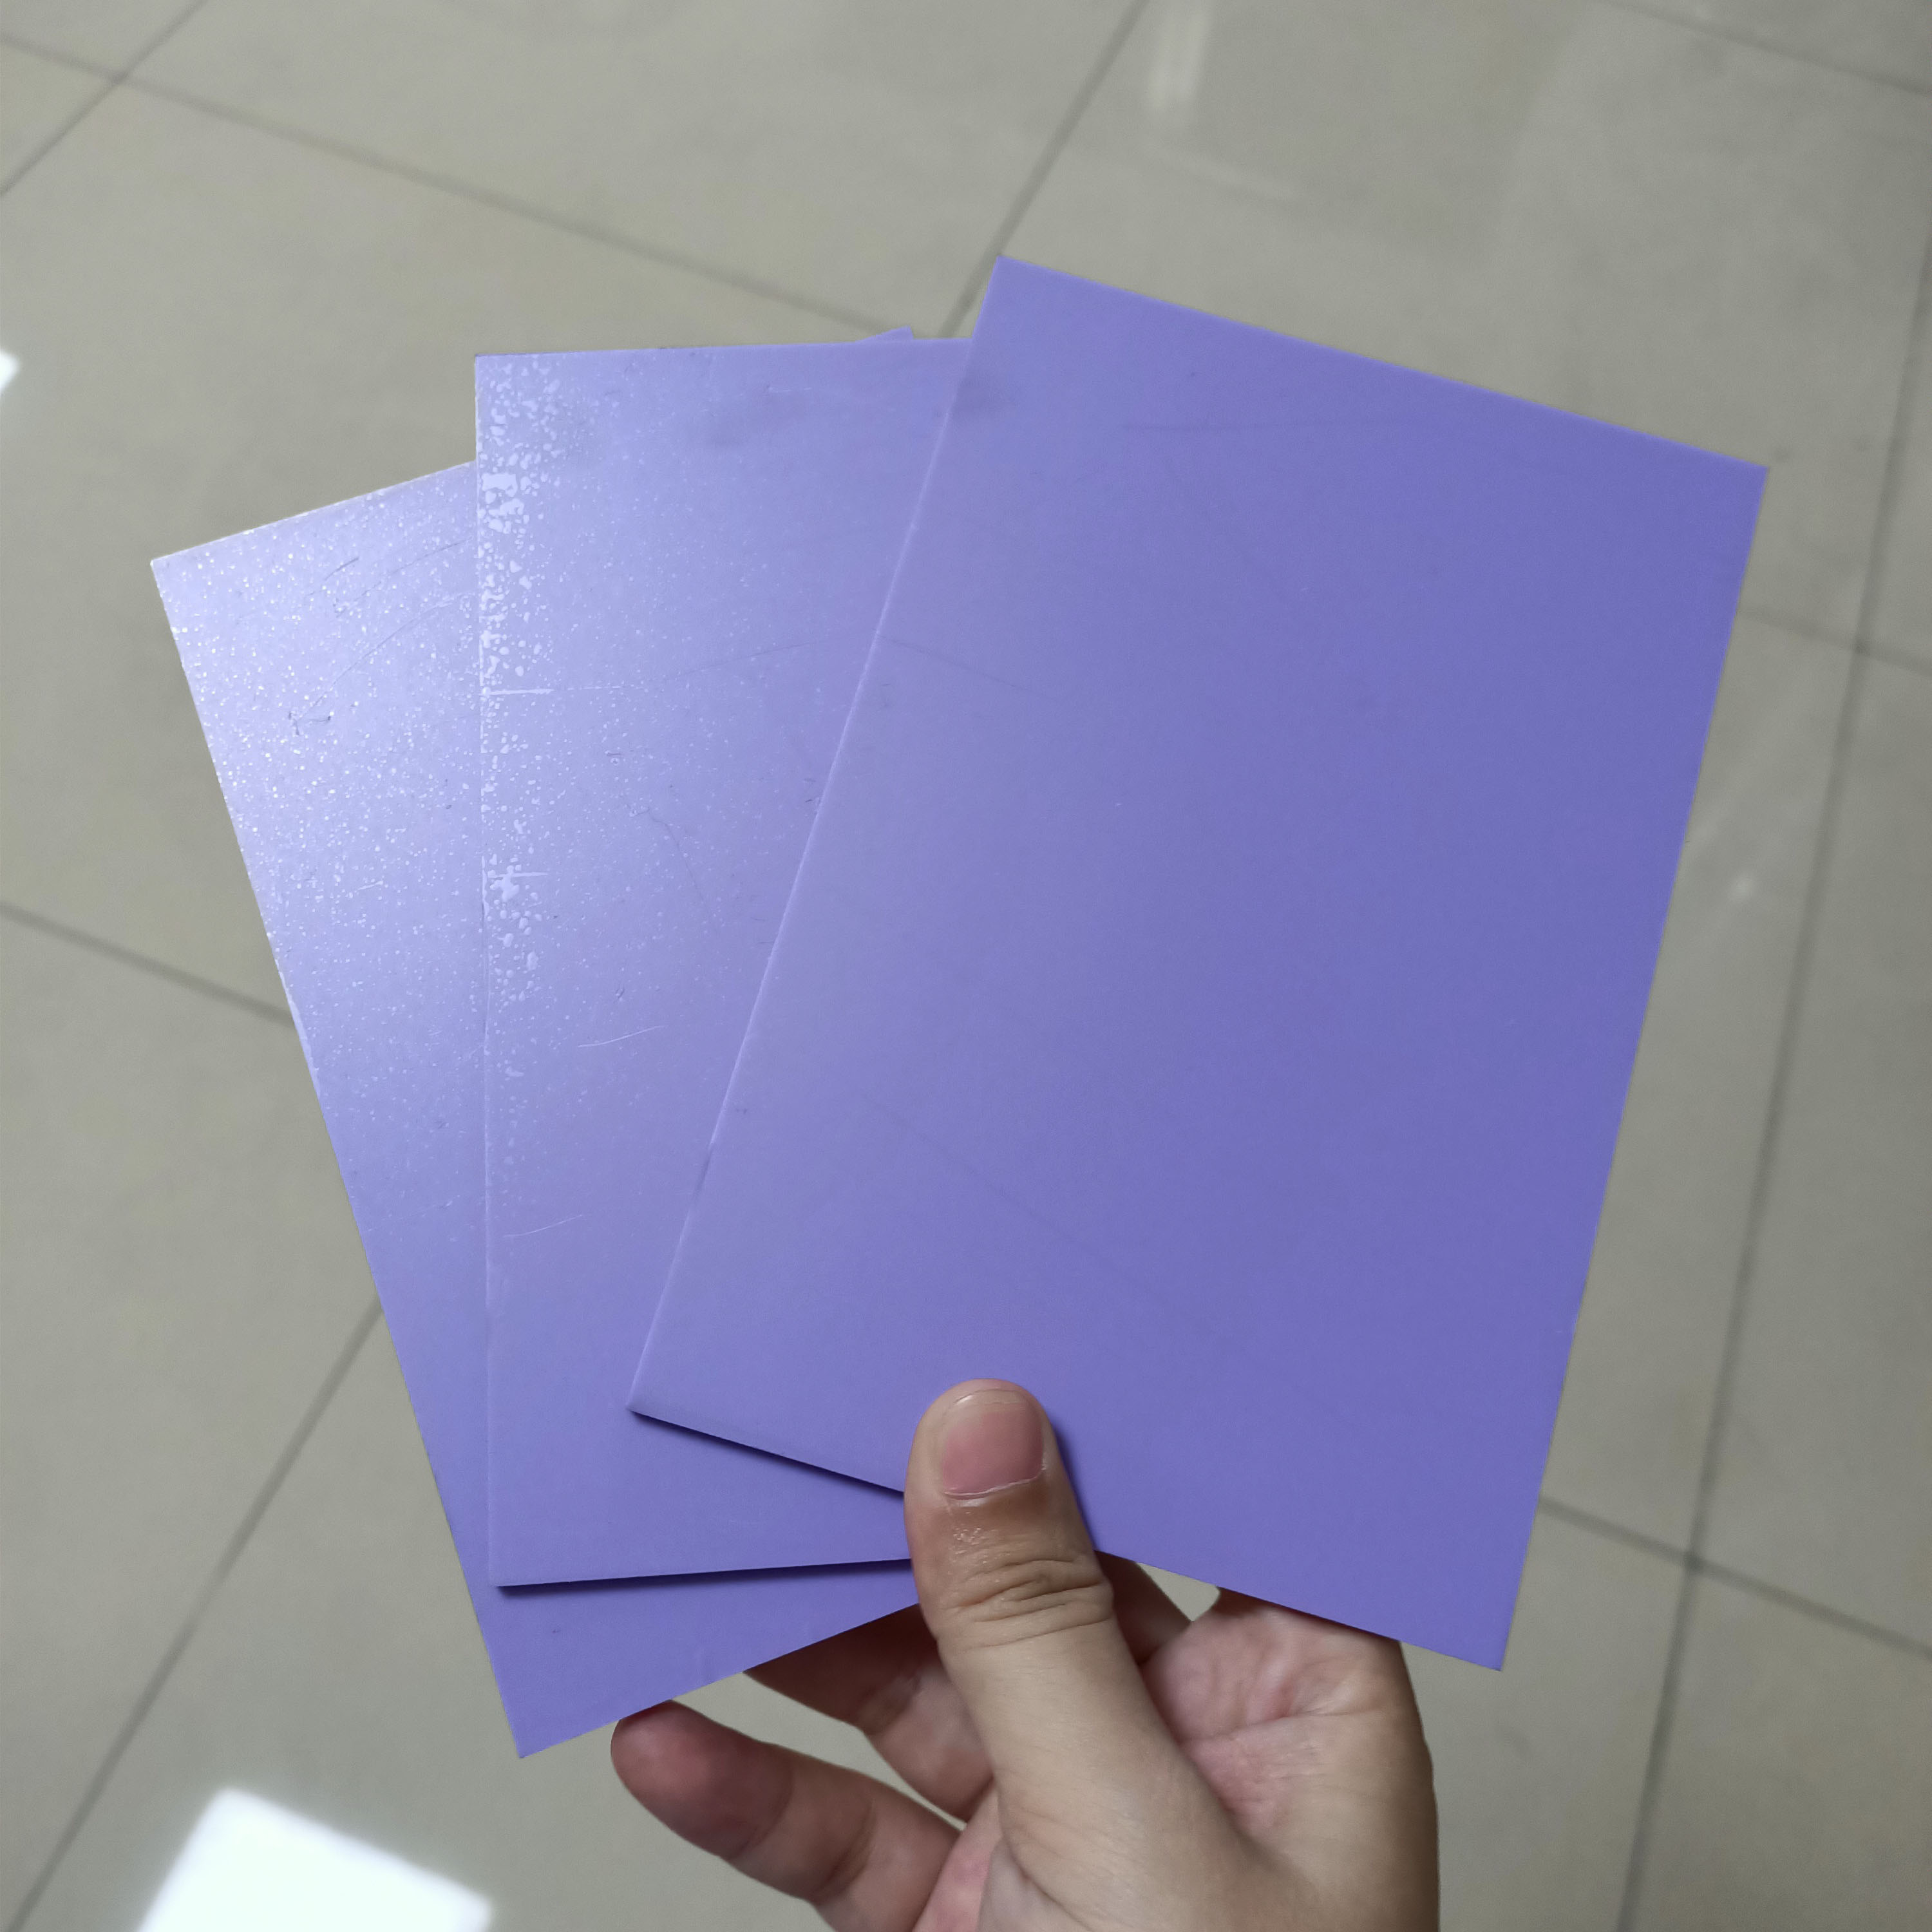 What thickness acrylic sheet？